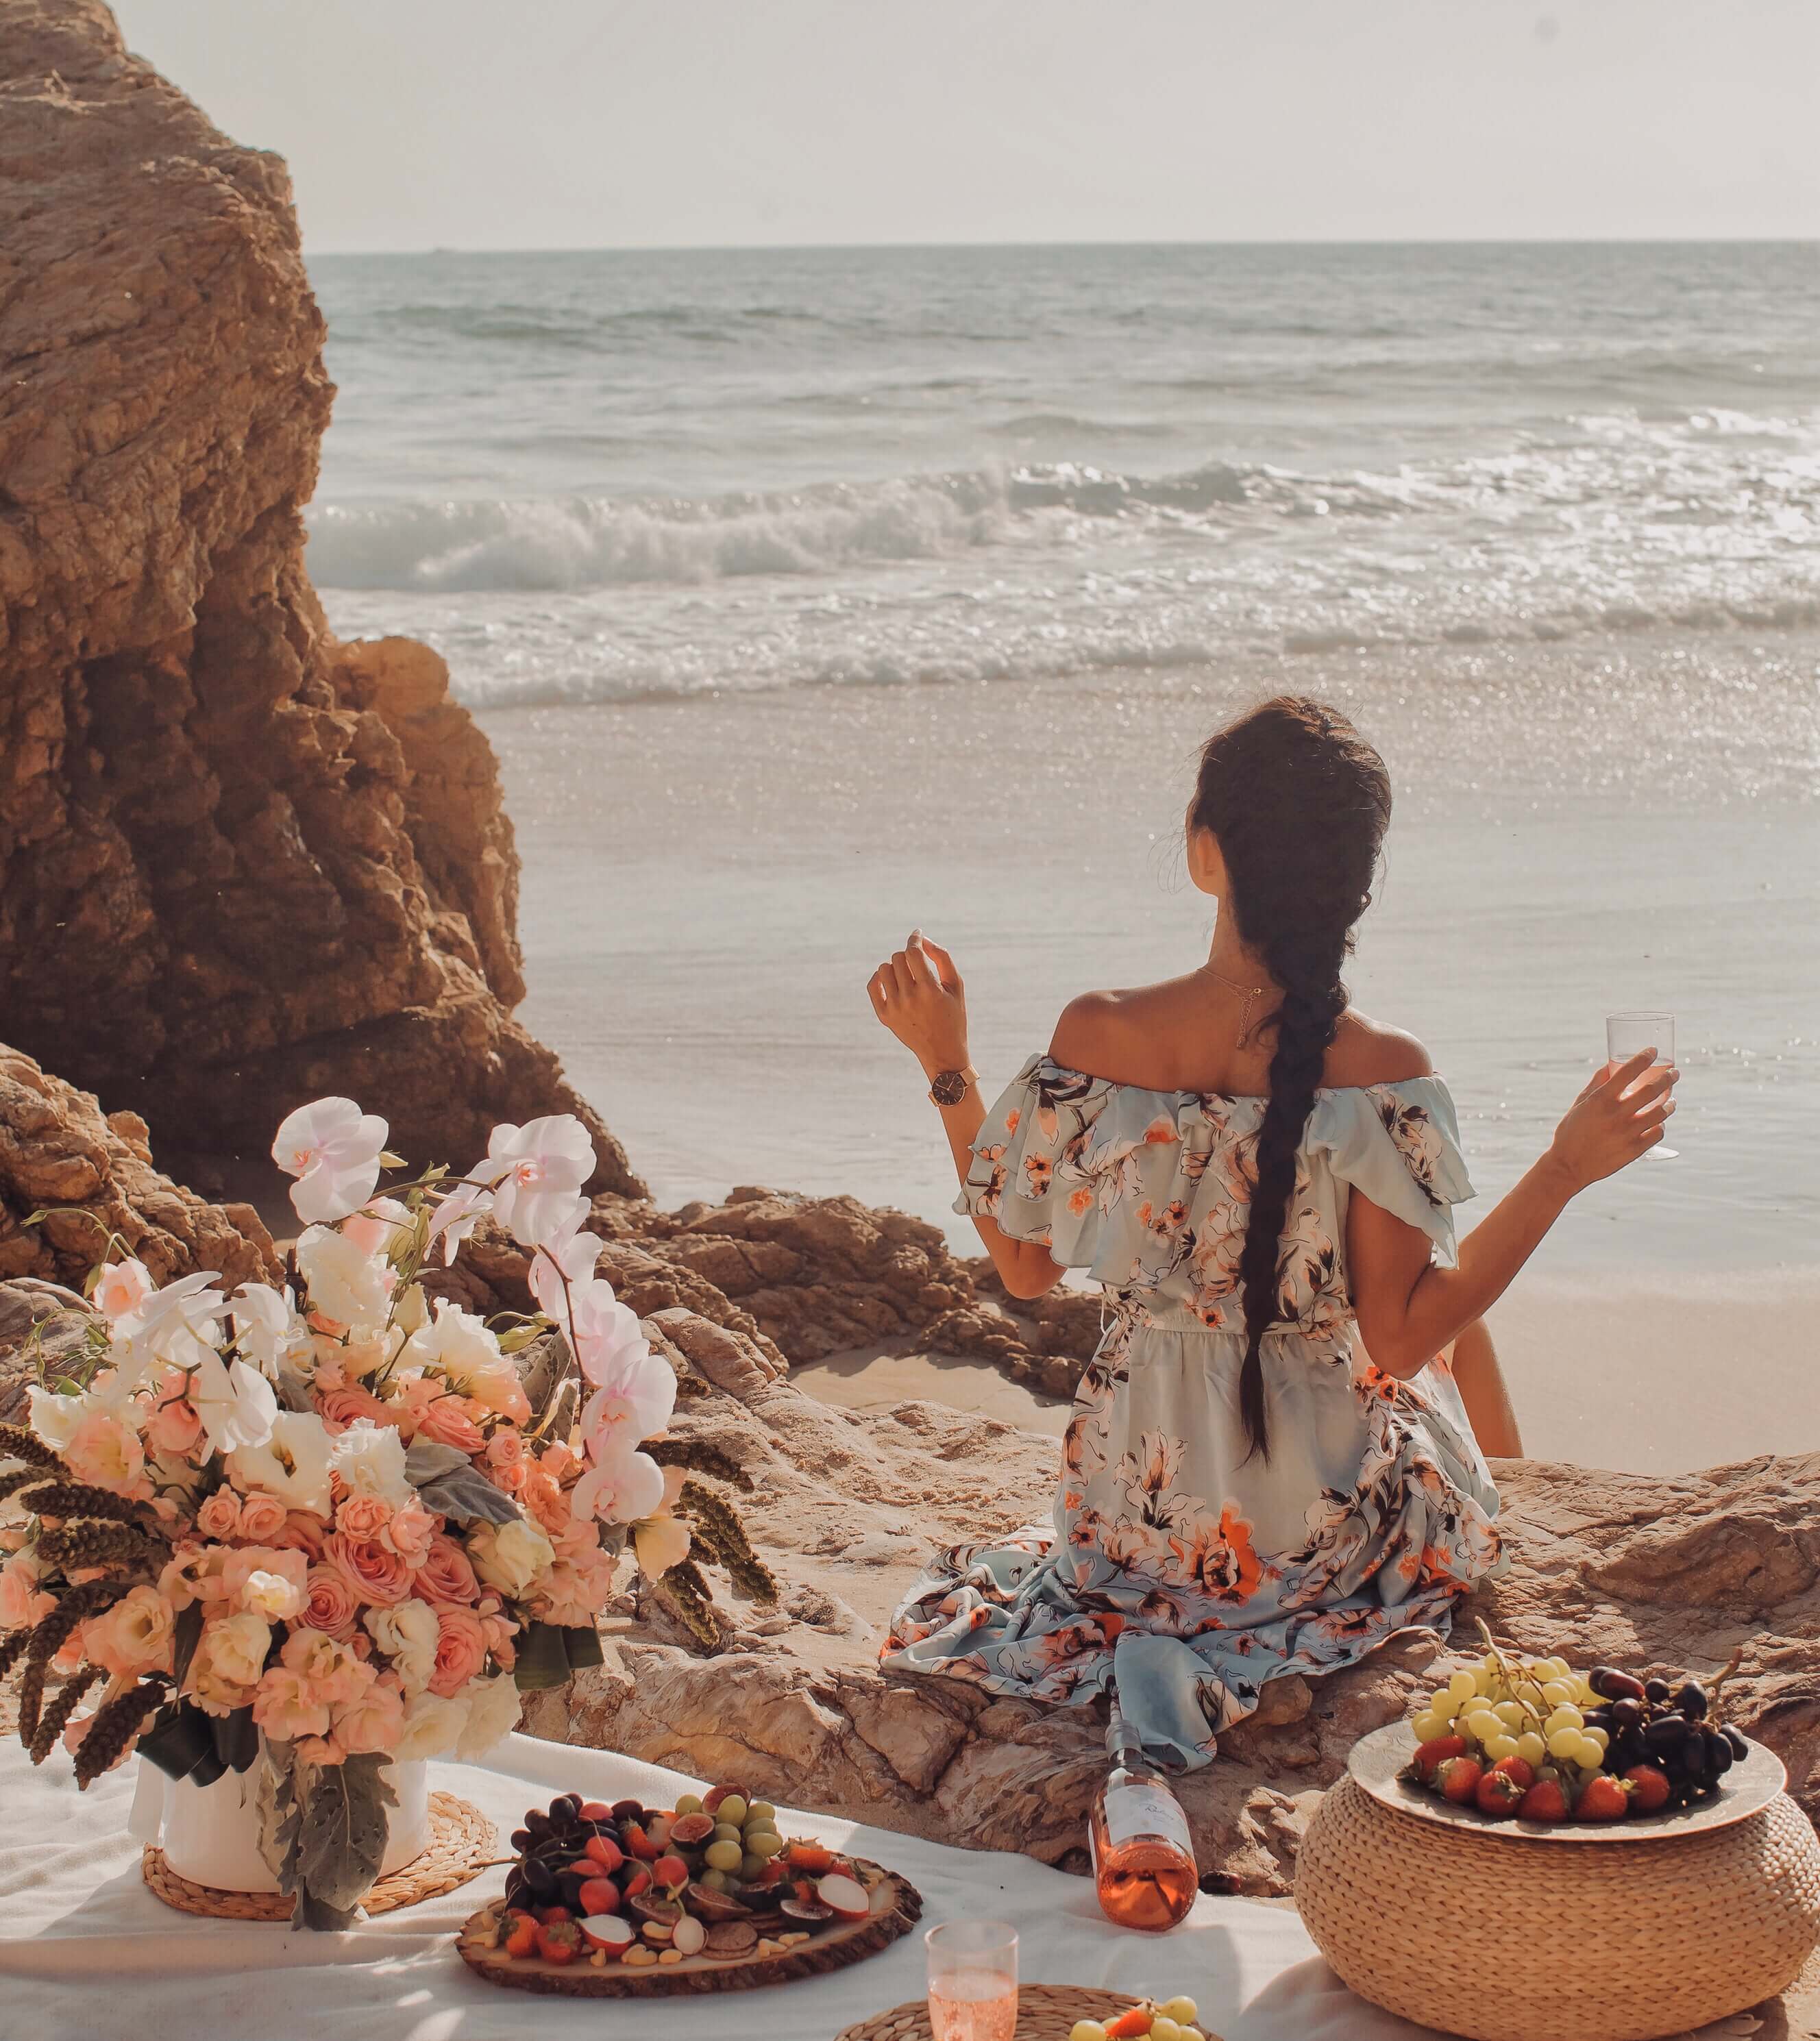 How to Plan a Picture-Perfect Beach Picnic - inAra By May Pham